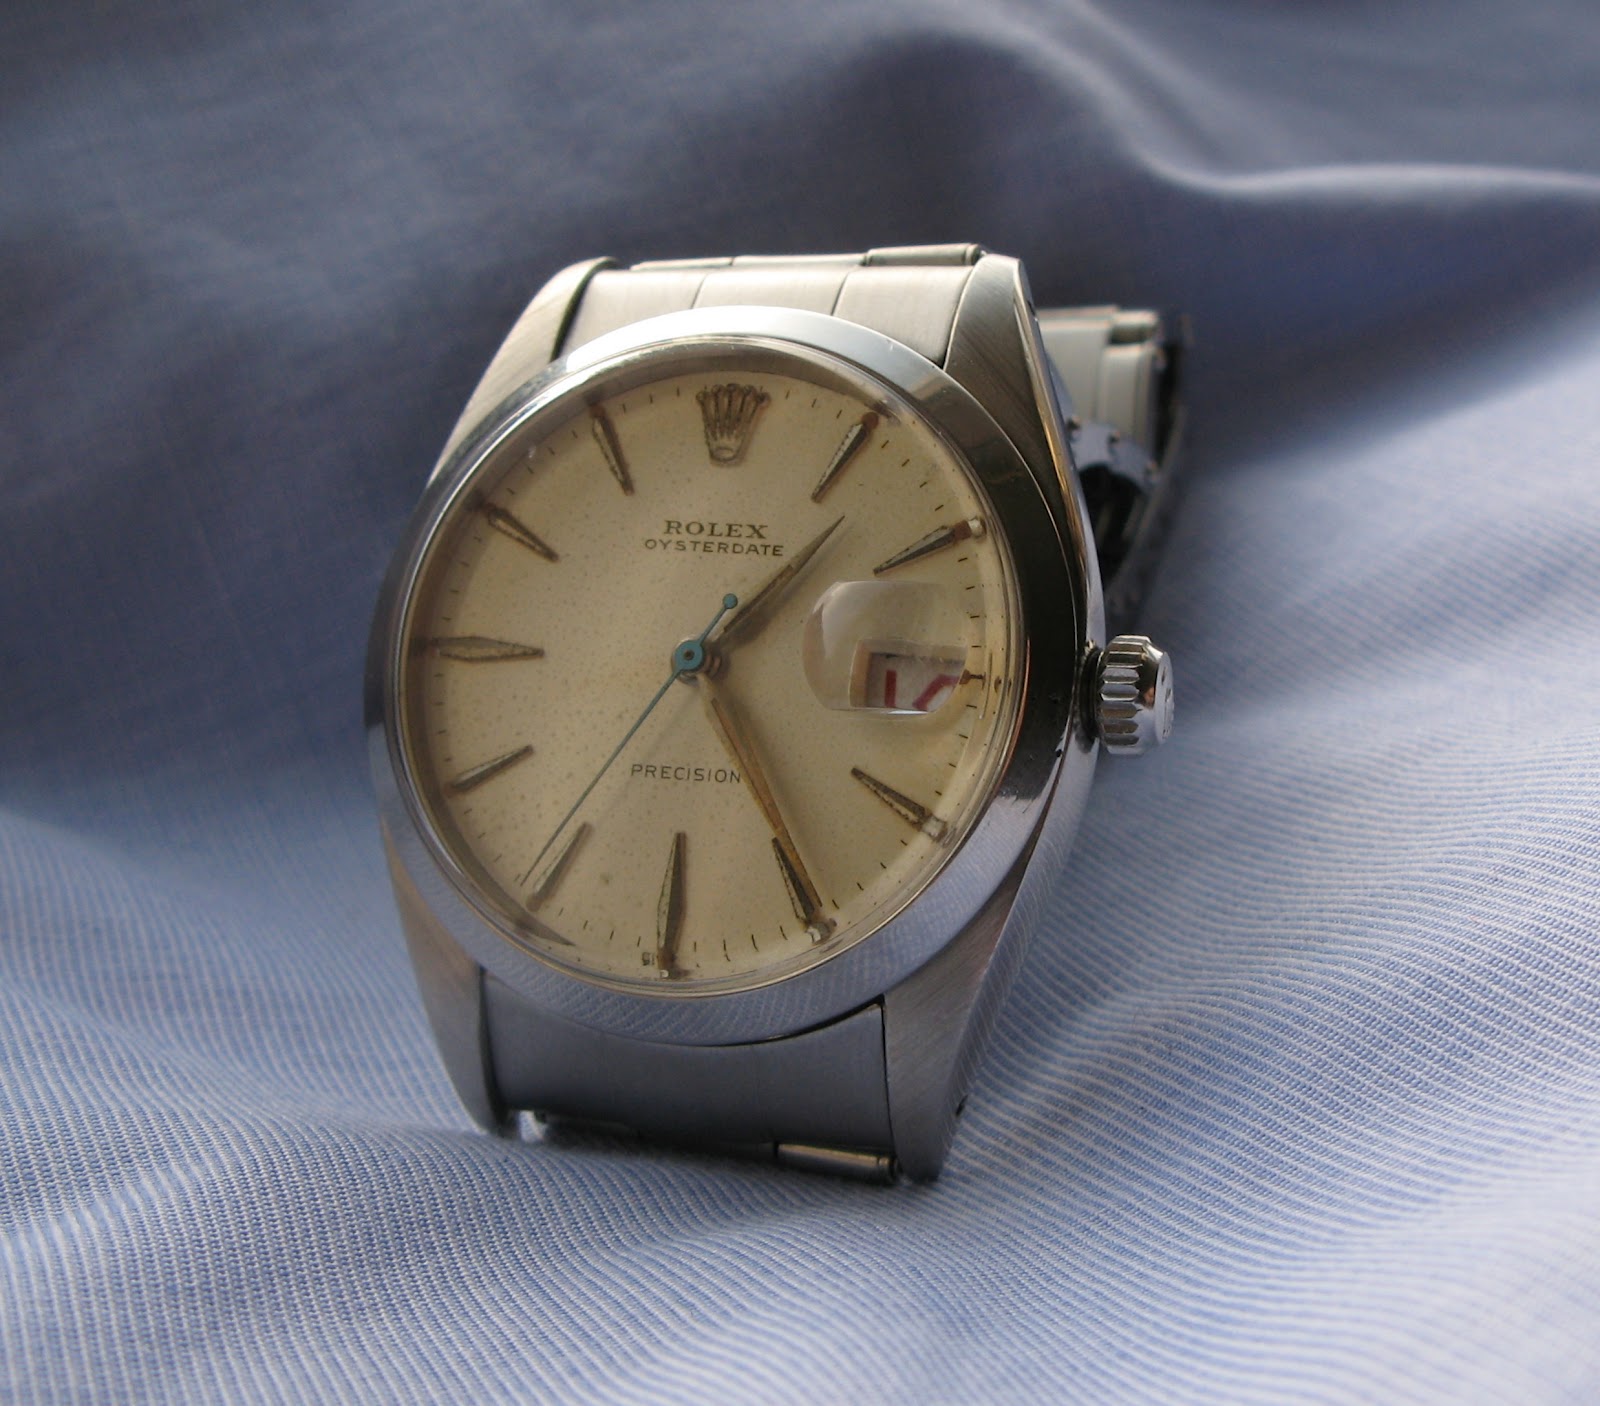 Andy B Vintage Watches: 1958 Rolex Oysterdate Precision 6694 Cal.1215 ...